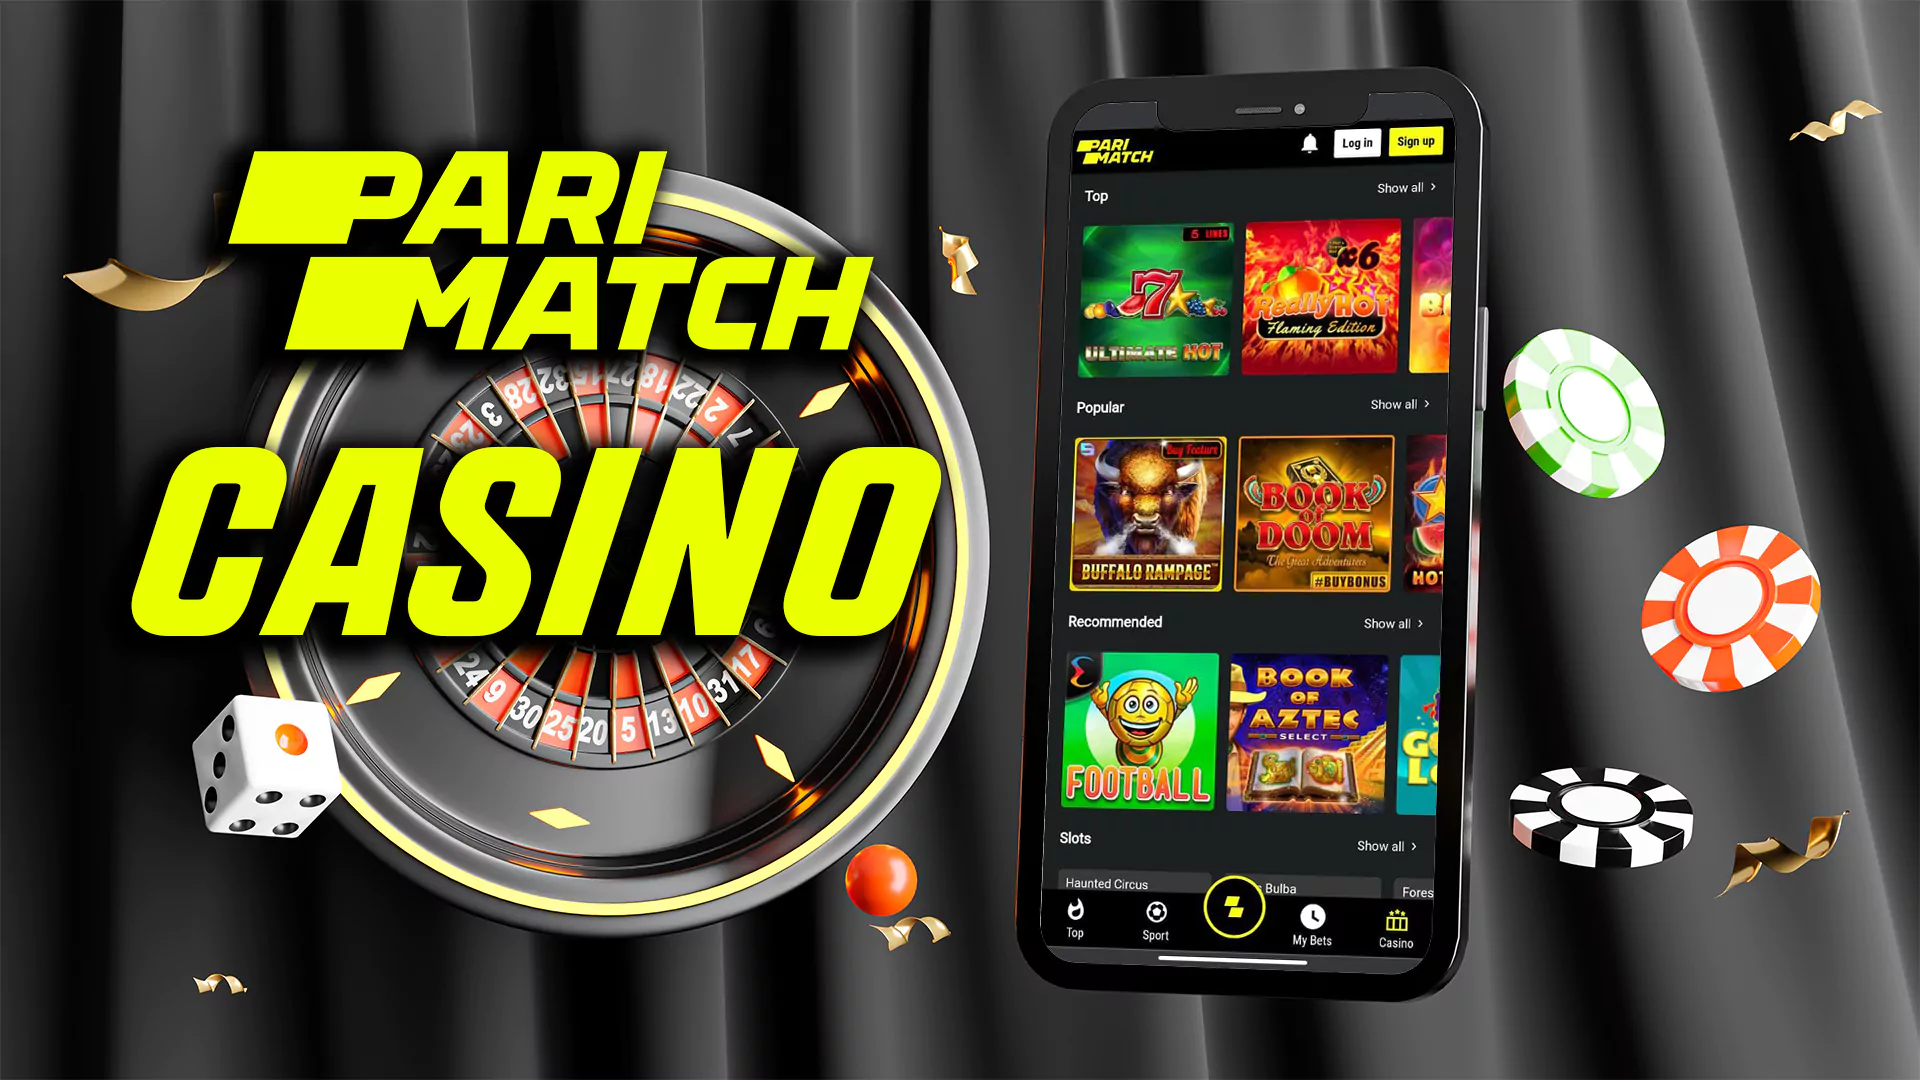 At Parimatch Casino App you can find the most popular casino games and take a little break from cricket betting.